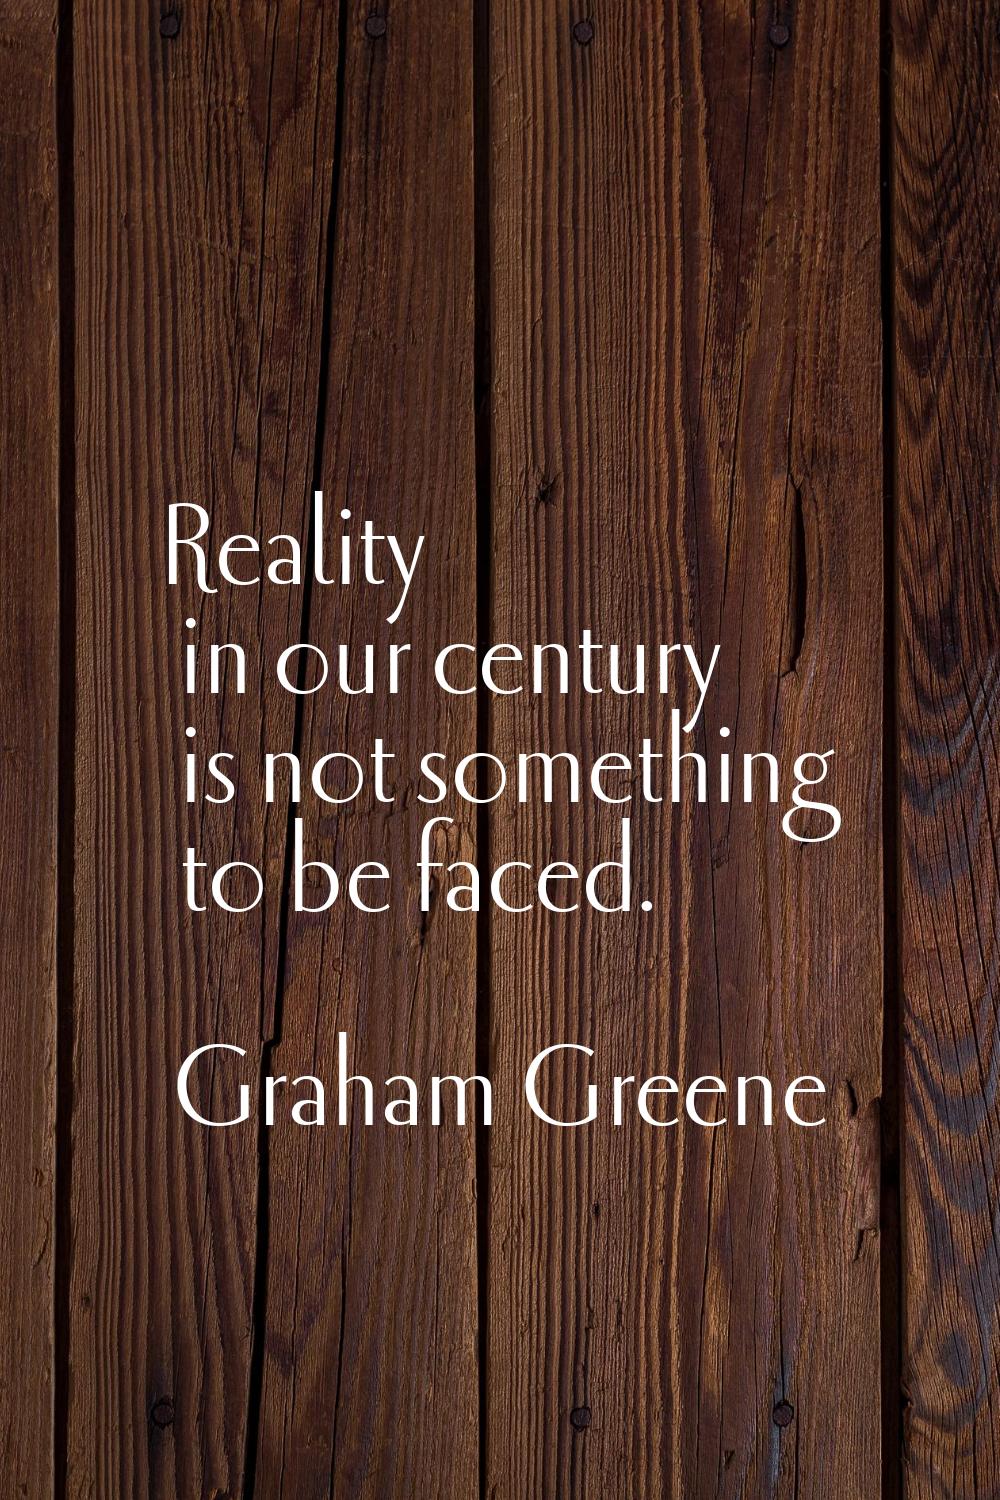 Reality in our century is not something to be faced.